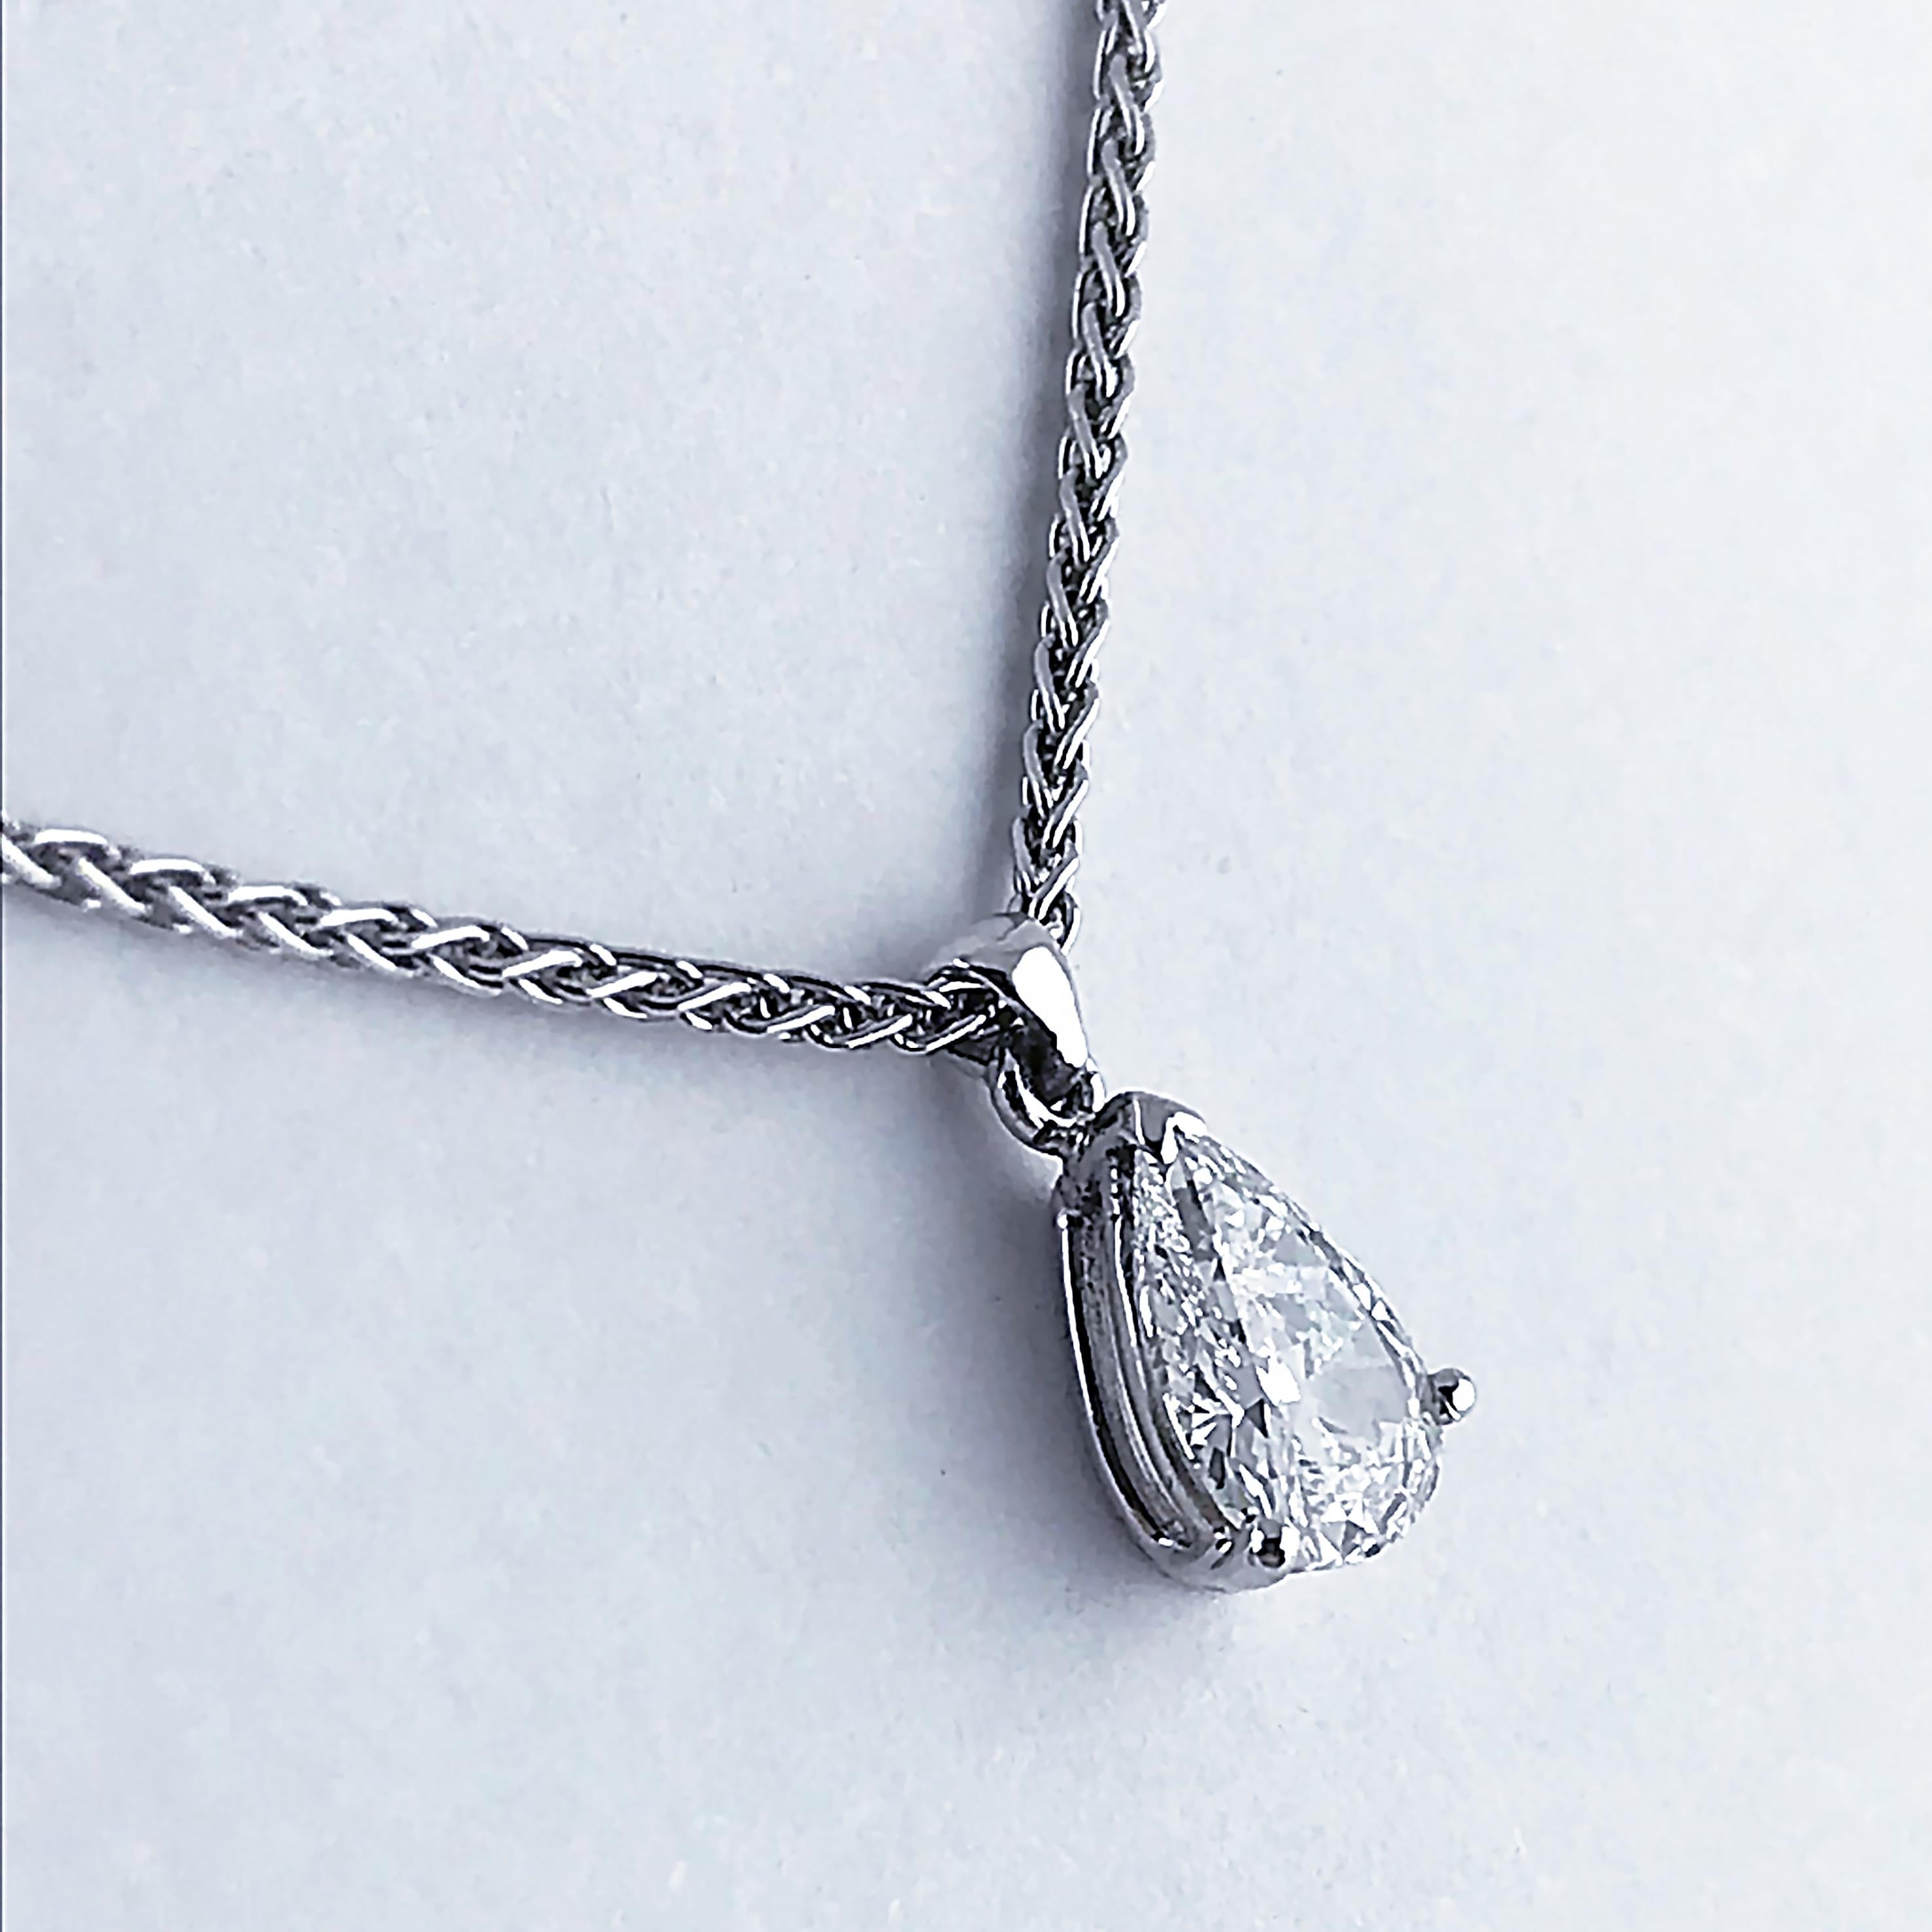 Certified Pear shape diamond drop of the highest colour on an 18ct white gold chain.

Diamond, Pear shape cut, 0.70carats, D, S12 (Certificated) mounted in 18ct white gold.


Dimensions:

Pendant (Diamond in setting)

Height 8 mm
Width 	5 mm (at